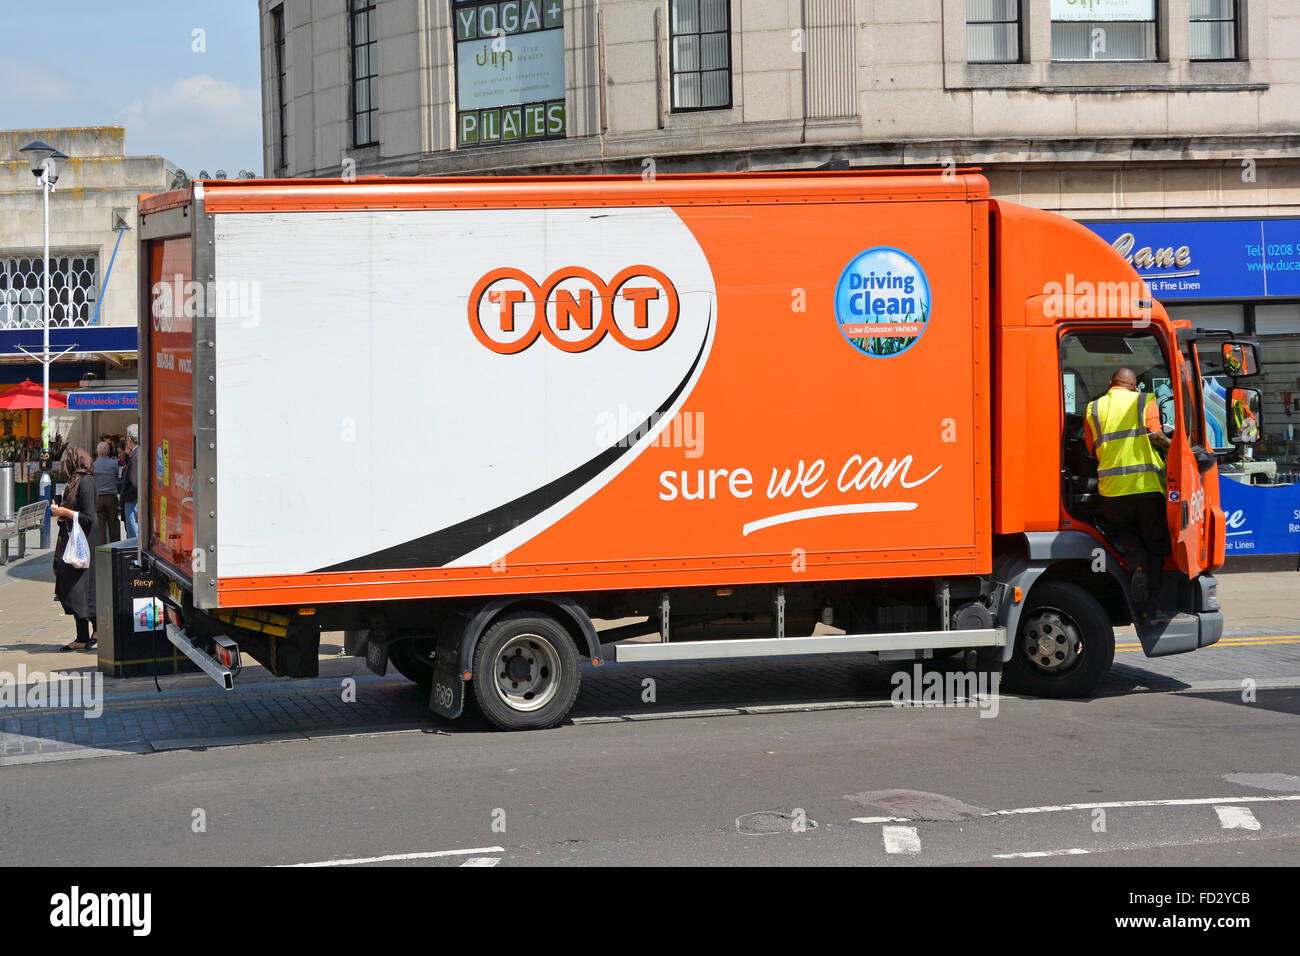 TNT 'Driving Clean' delivery van and driver parked in Wimbledon London to make a delivery Stock Photo